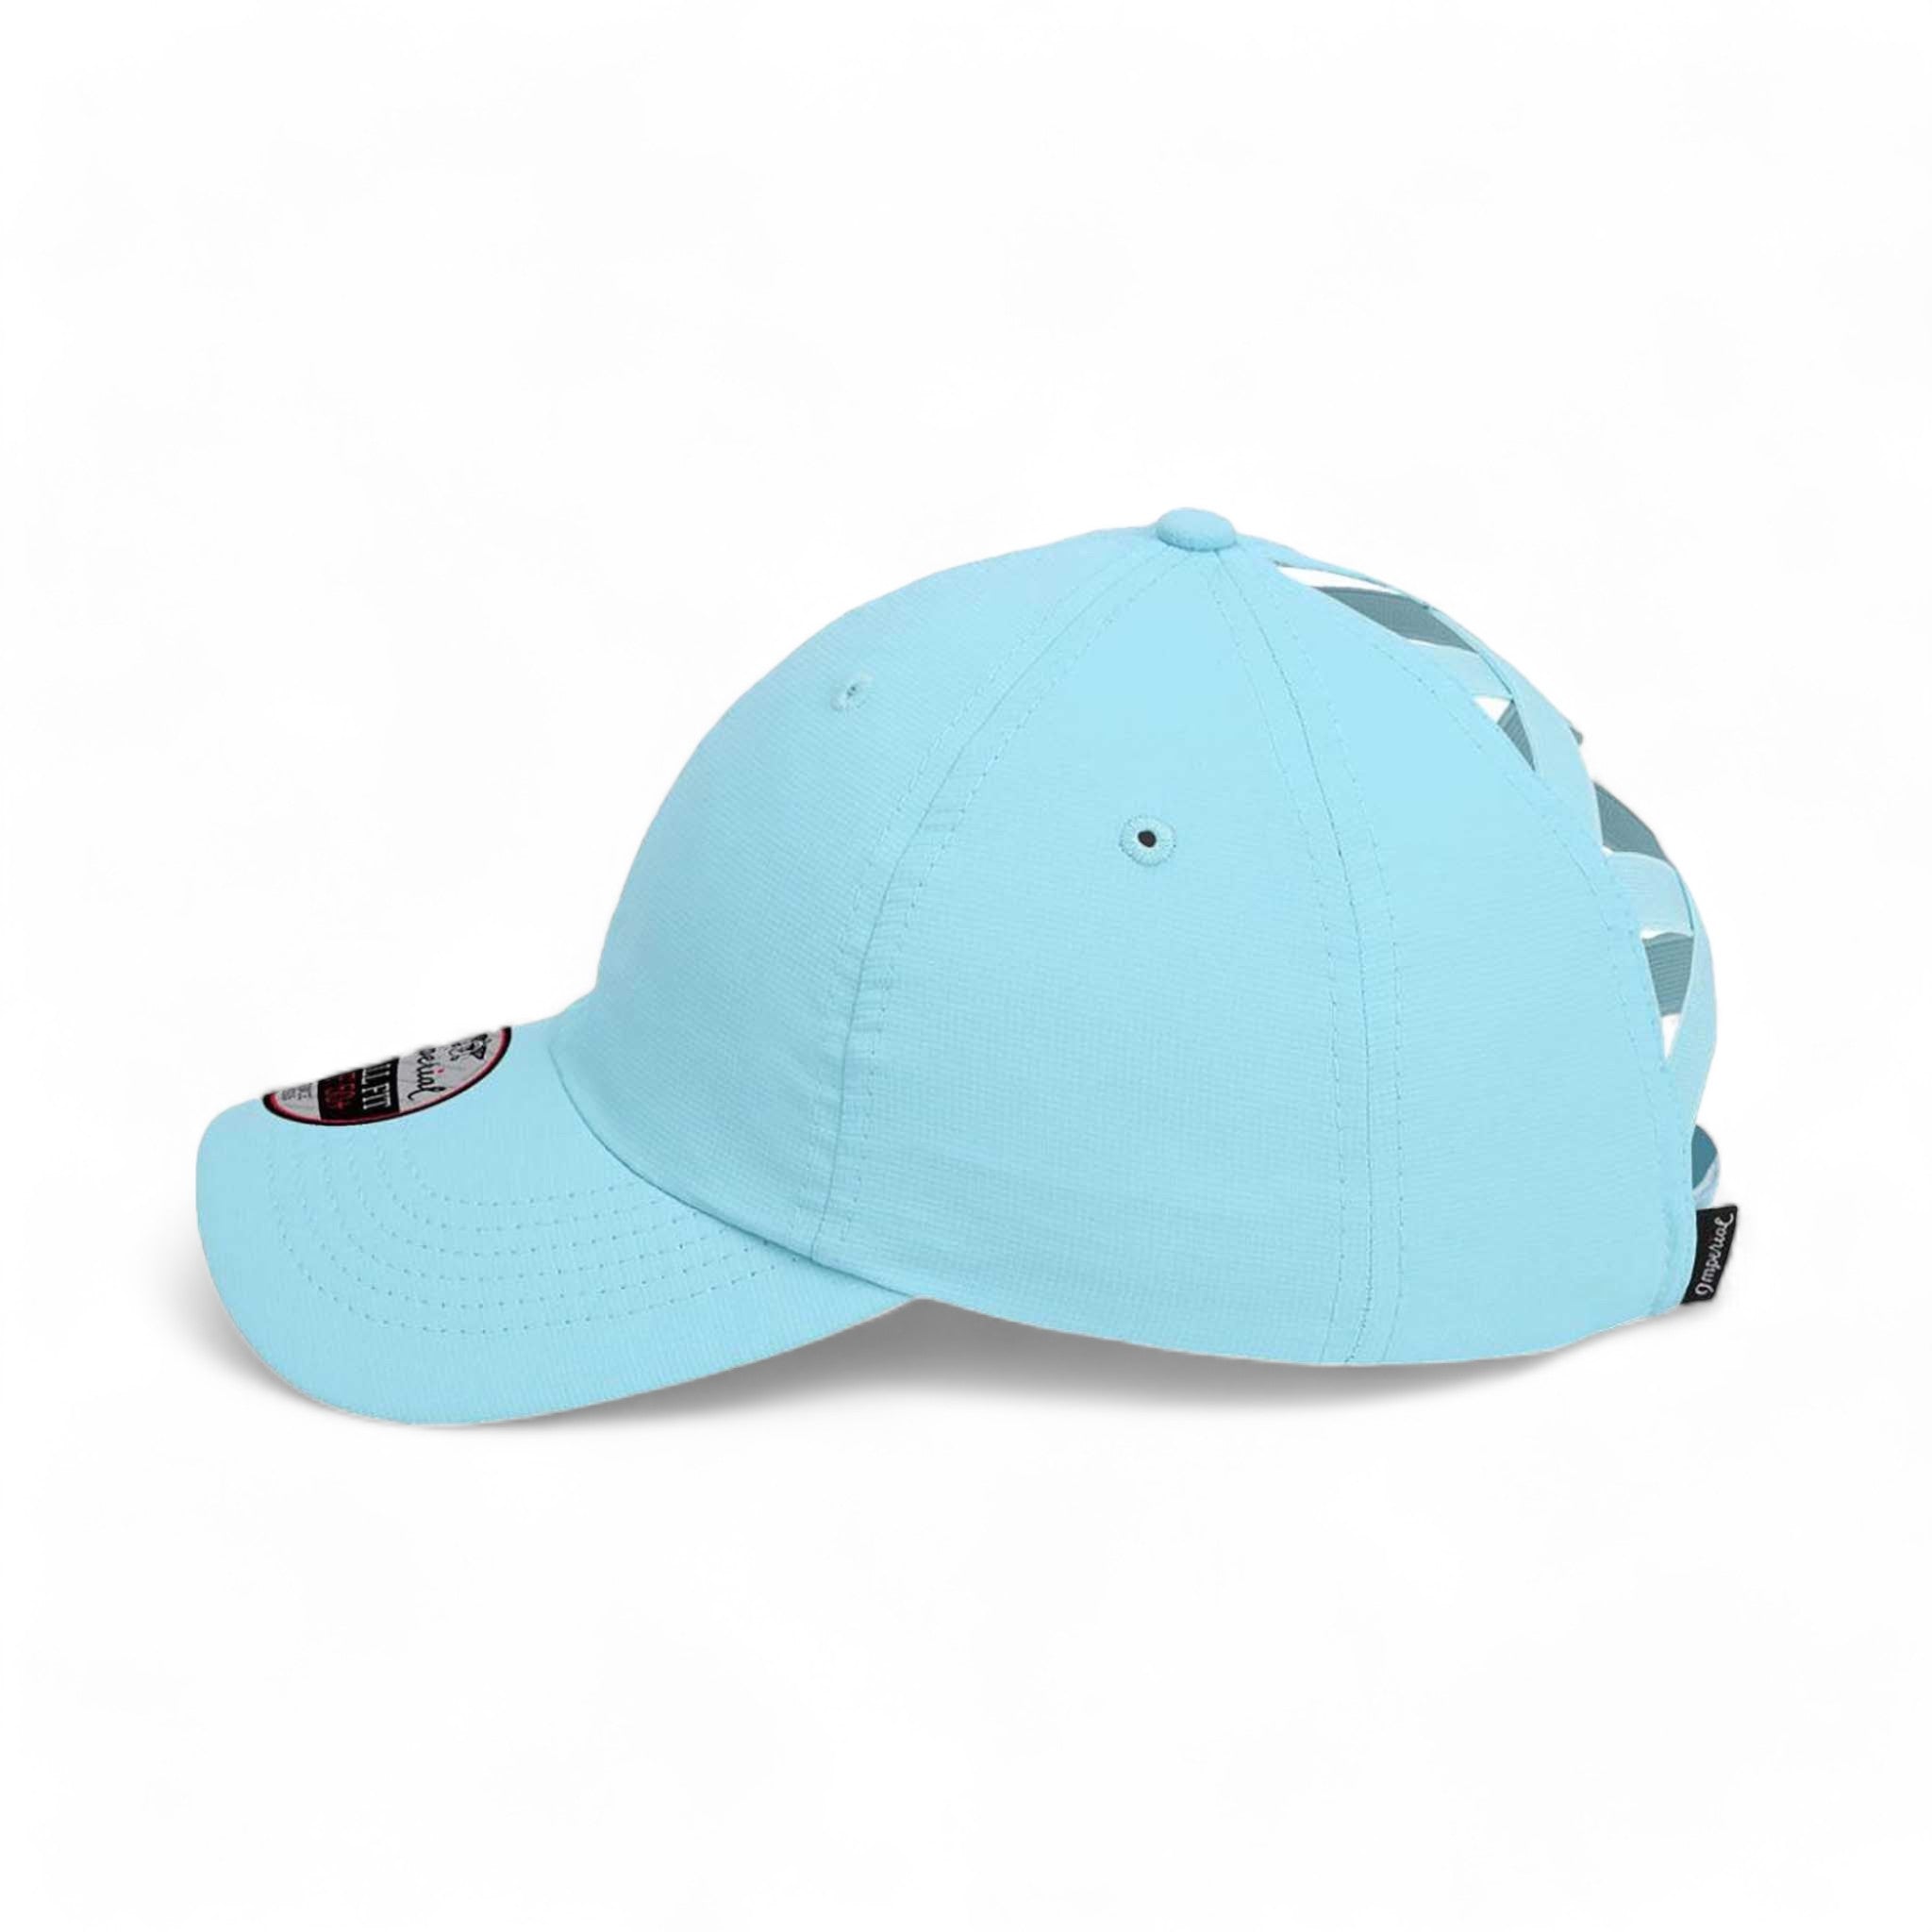 Side view of Imperial L338 custom hat in light blue